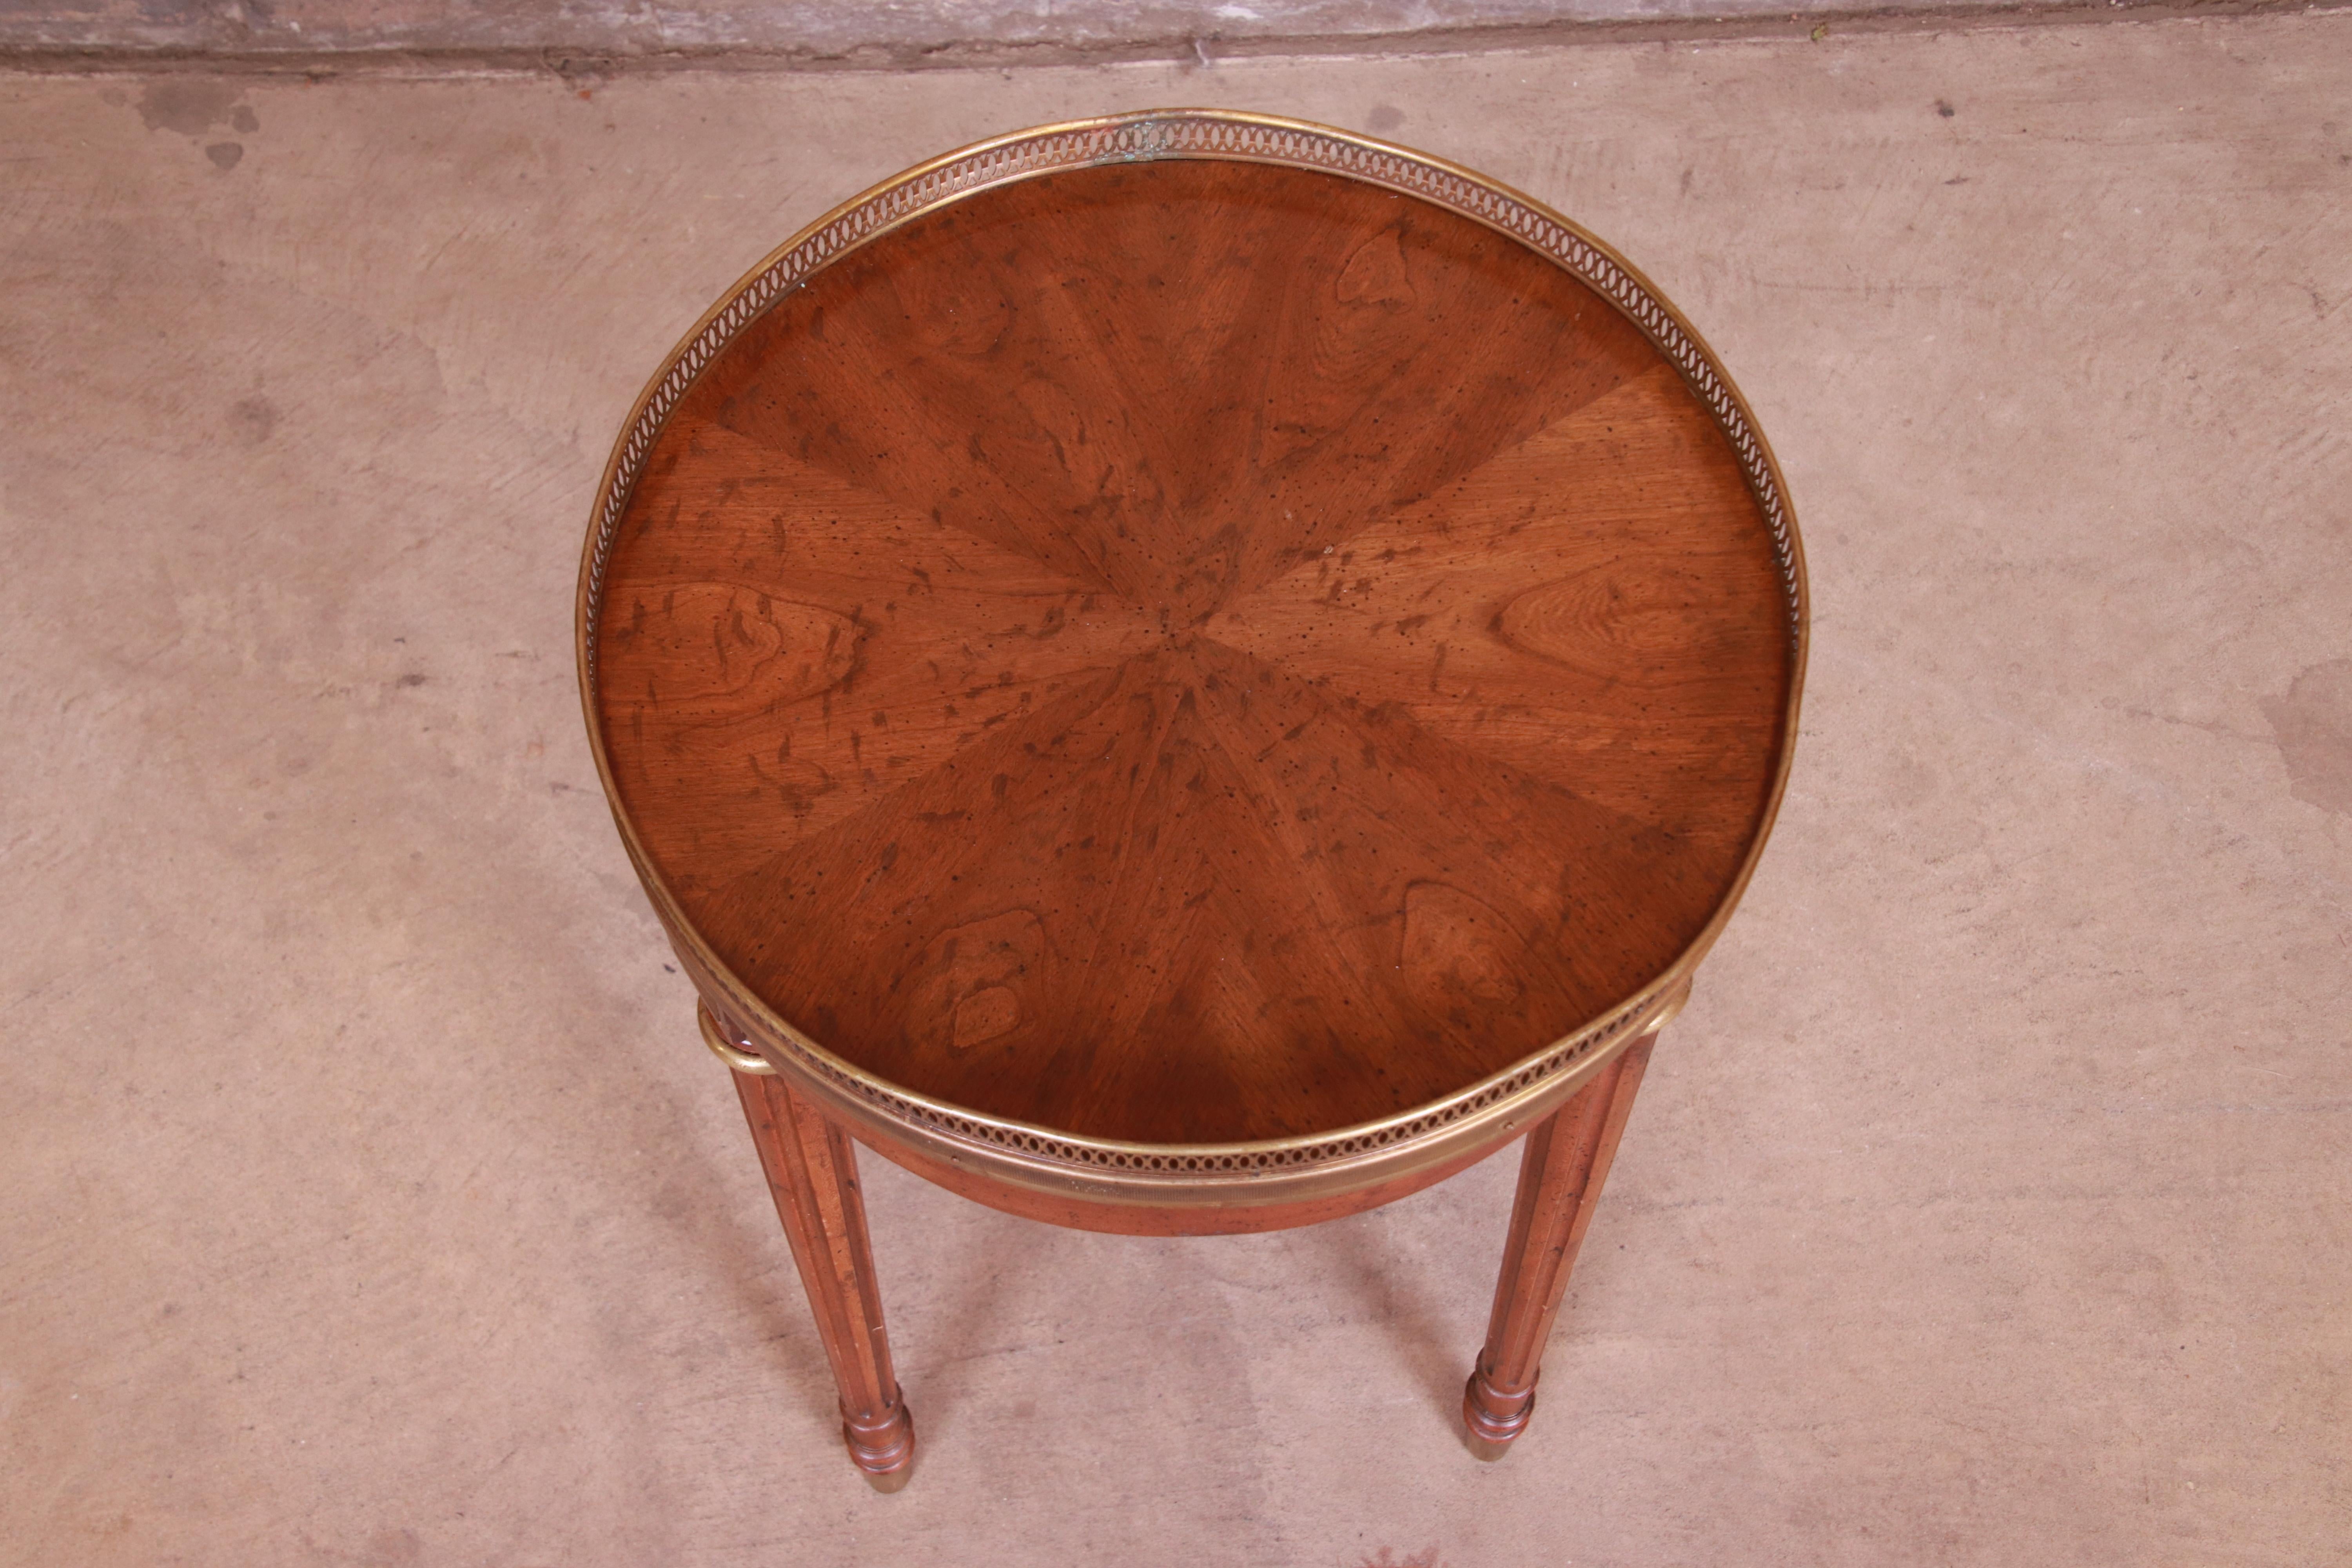 Heritage French Regency Walnut and Brass Tea Table or Occasional Side Table 2